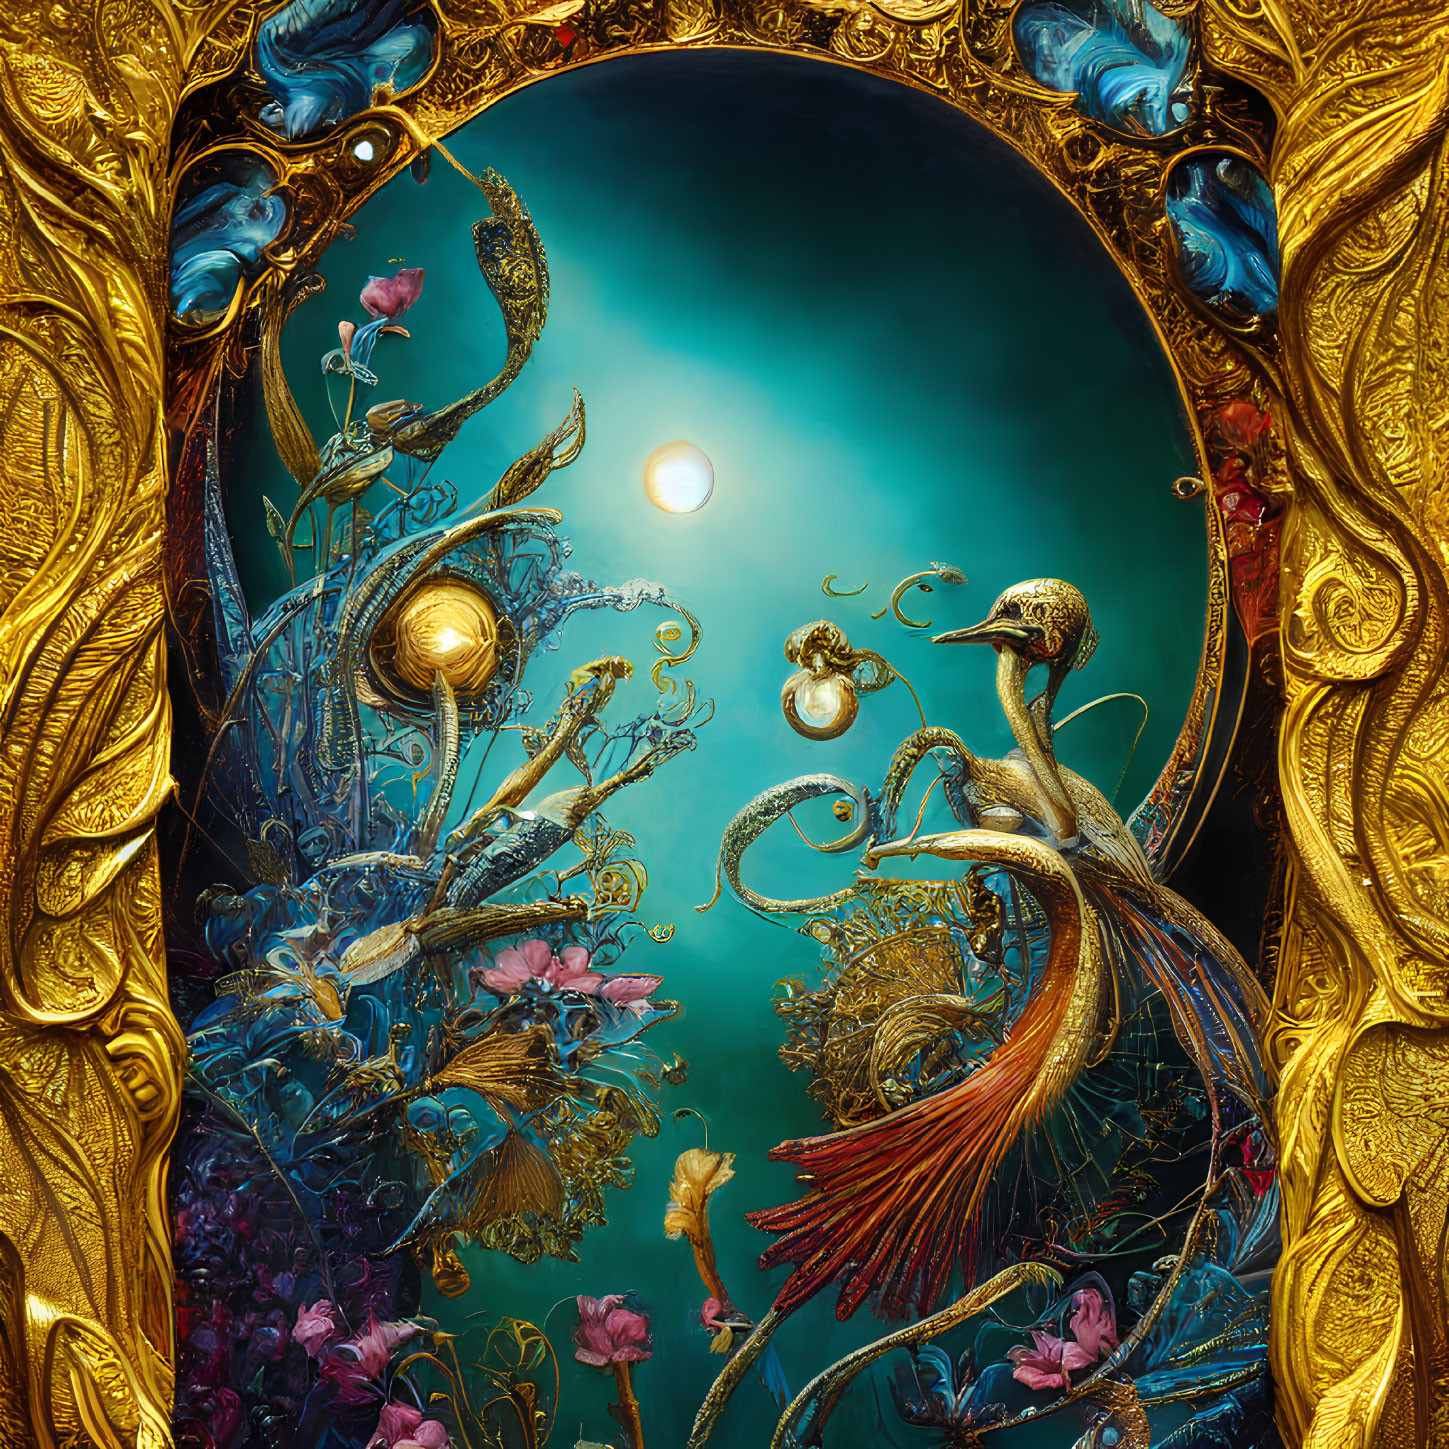 Stylized peacock in gold frame with floral and aquatic motifs